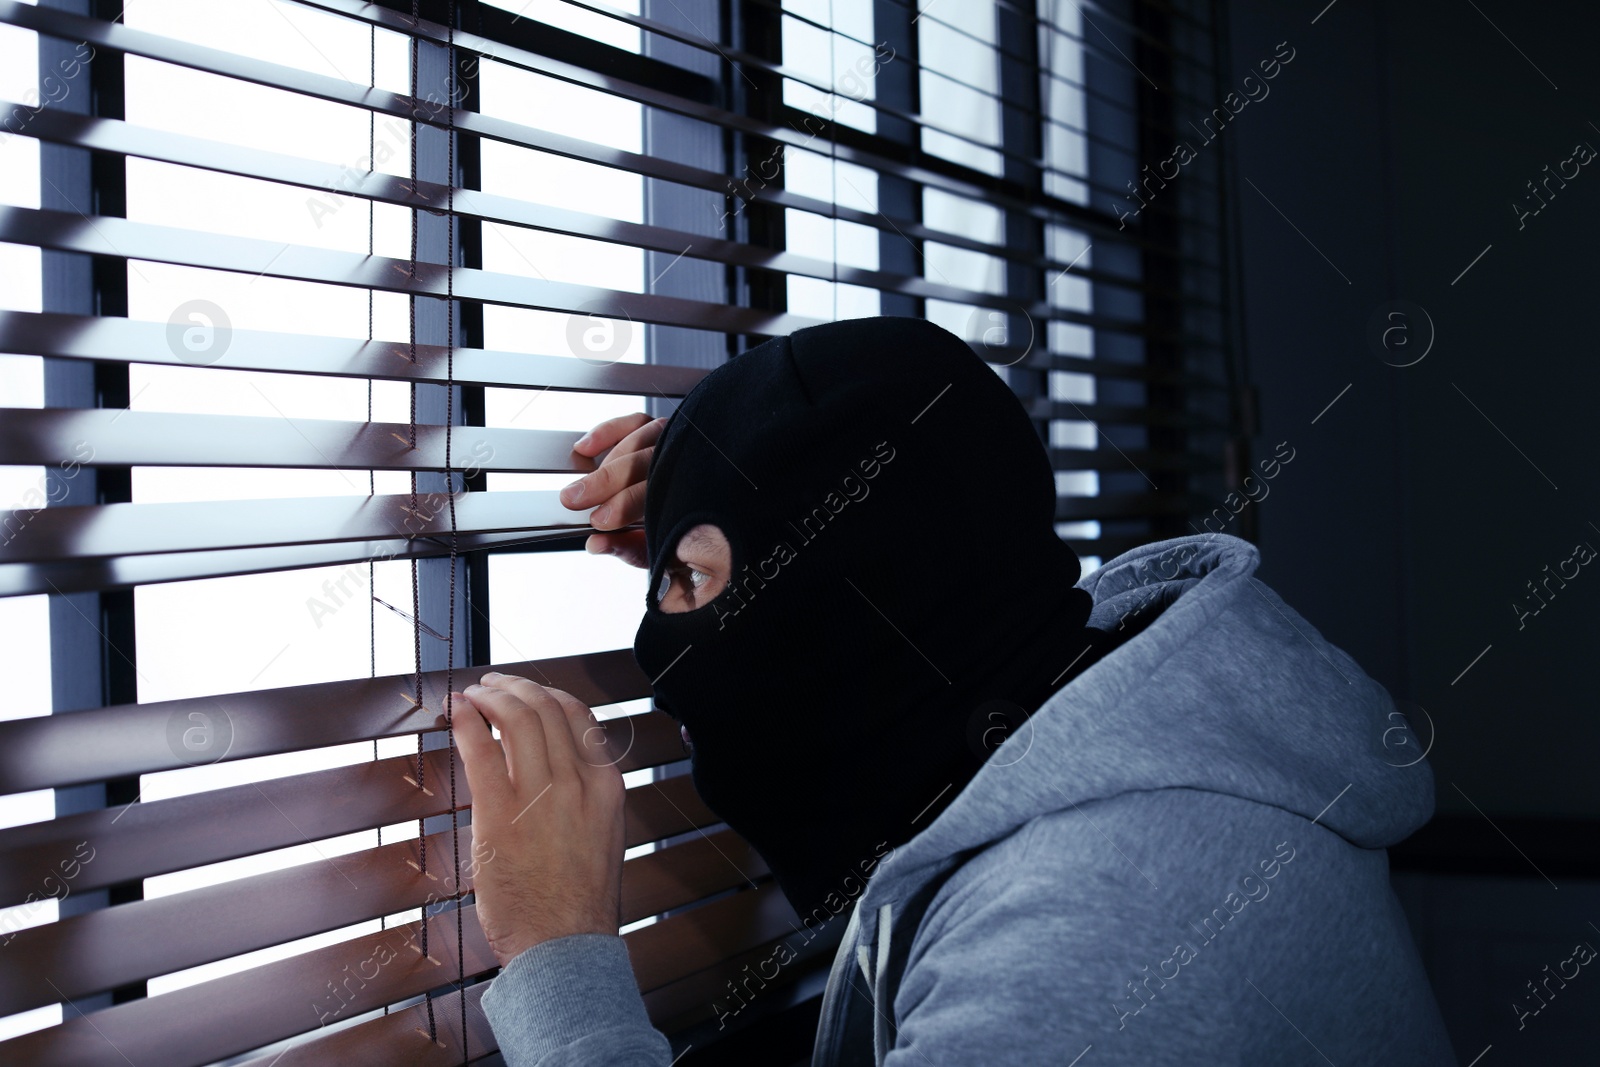 Photo of Masked man spying through window blinds indoors. Criminal offence